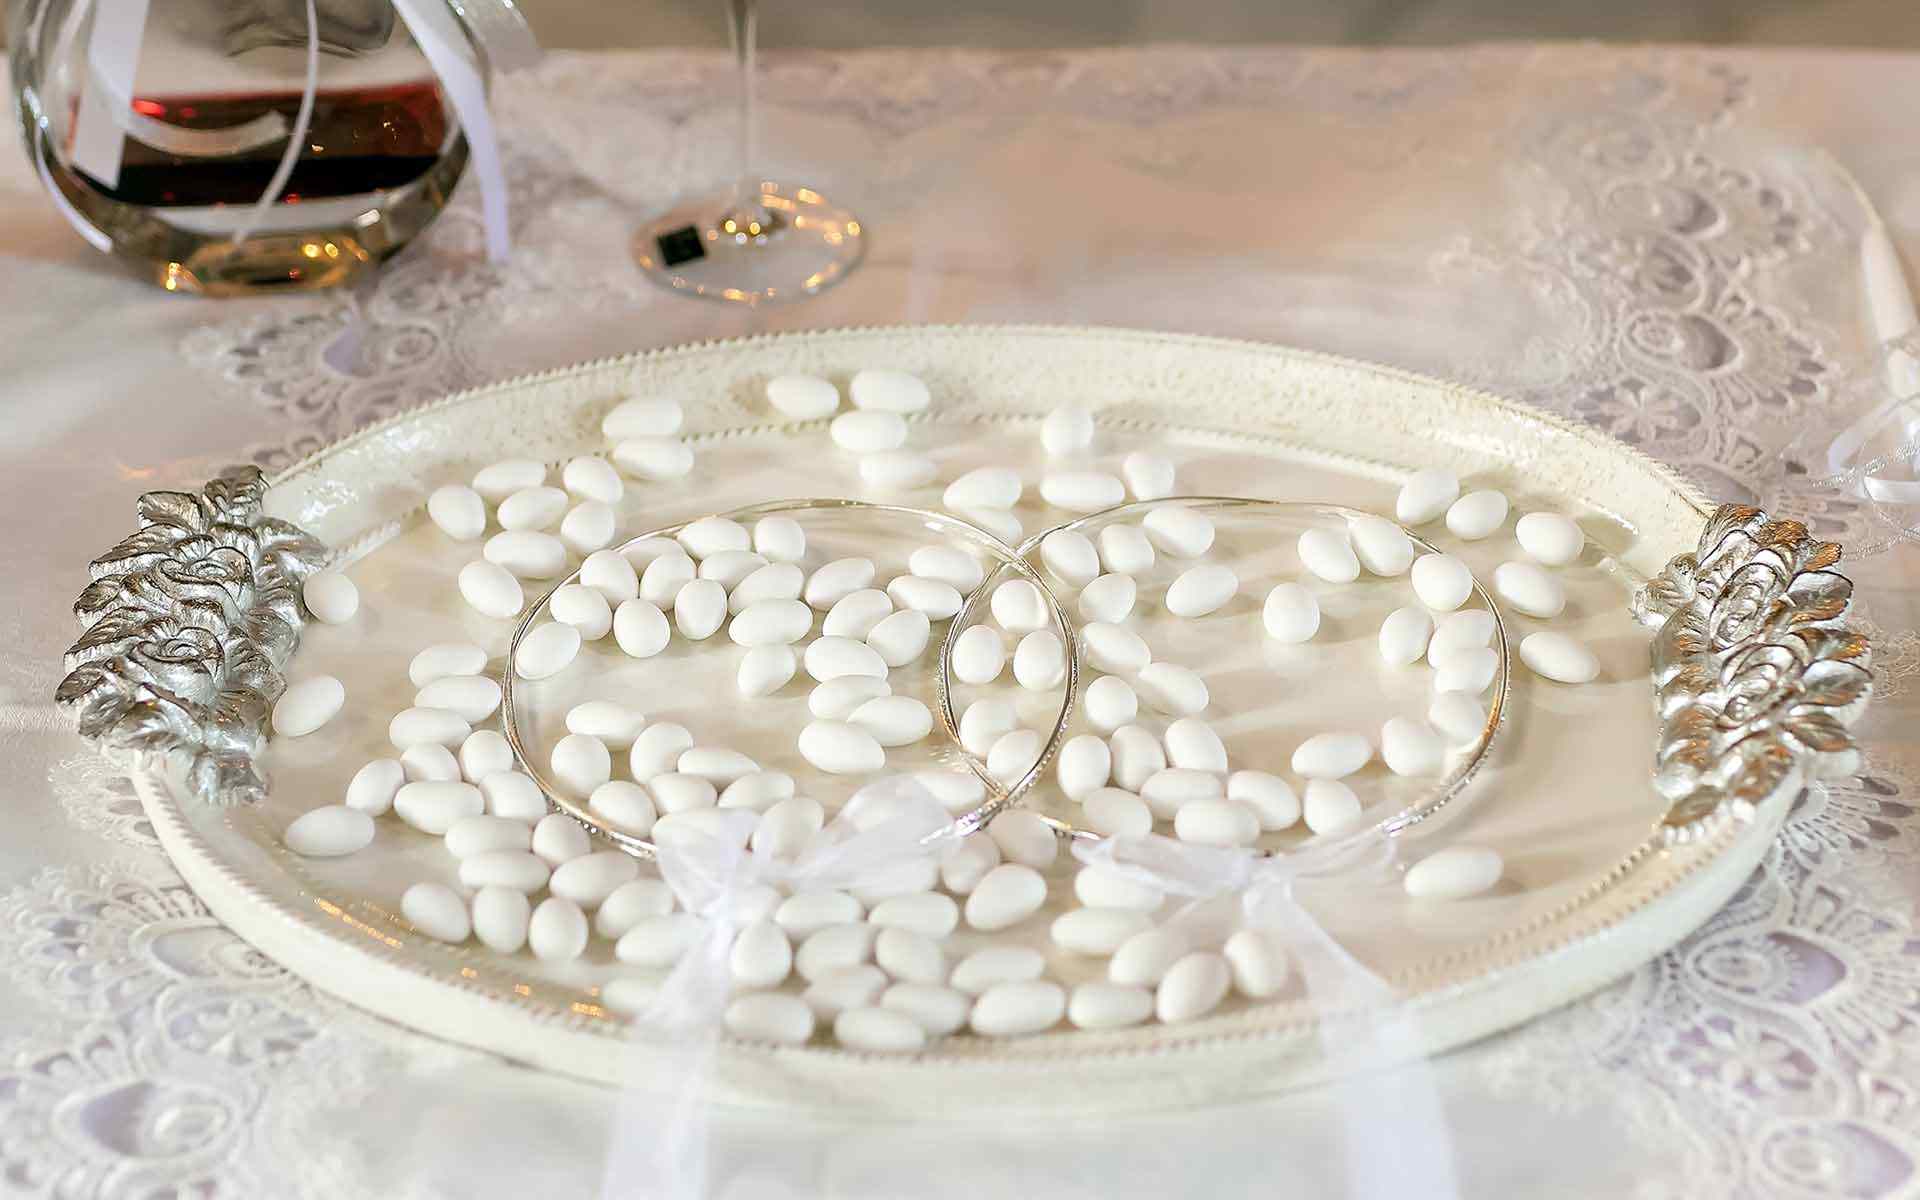 Handmade-White-Wooden-Wedding-Serving-Tray-by-Diamond-Events-Wedding-Event-planning-services